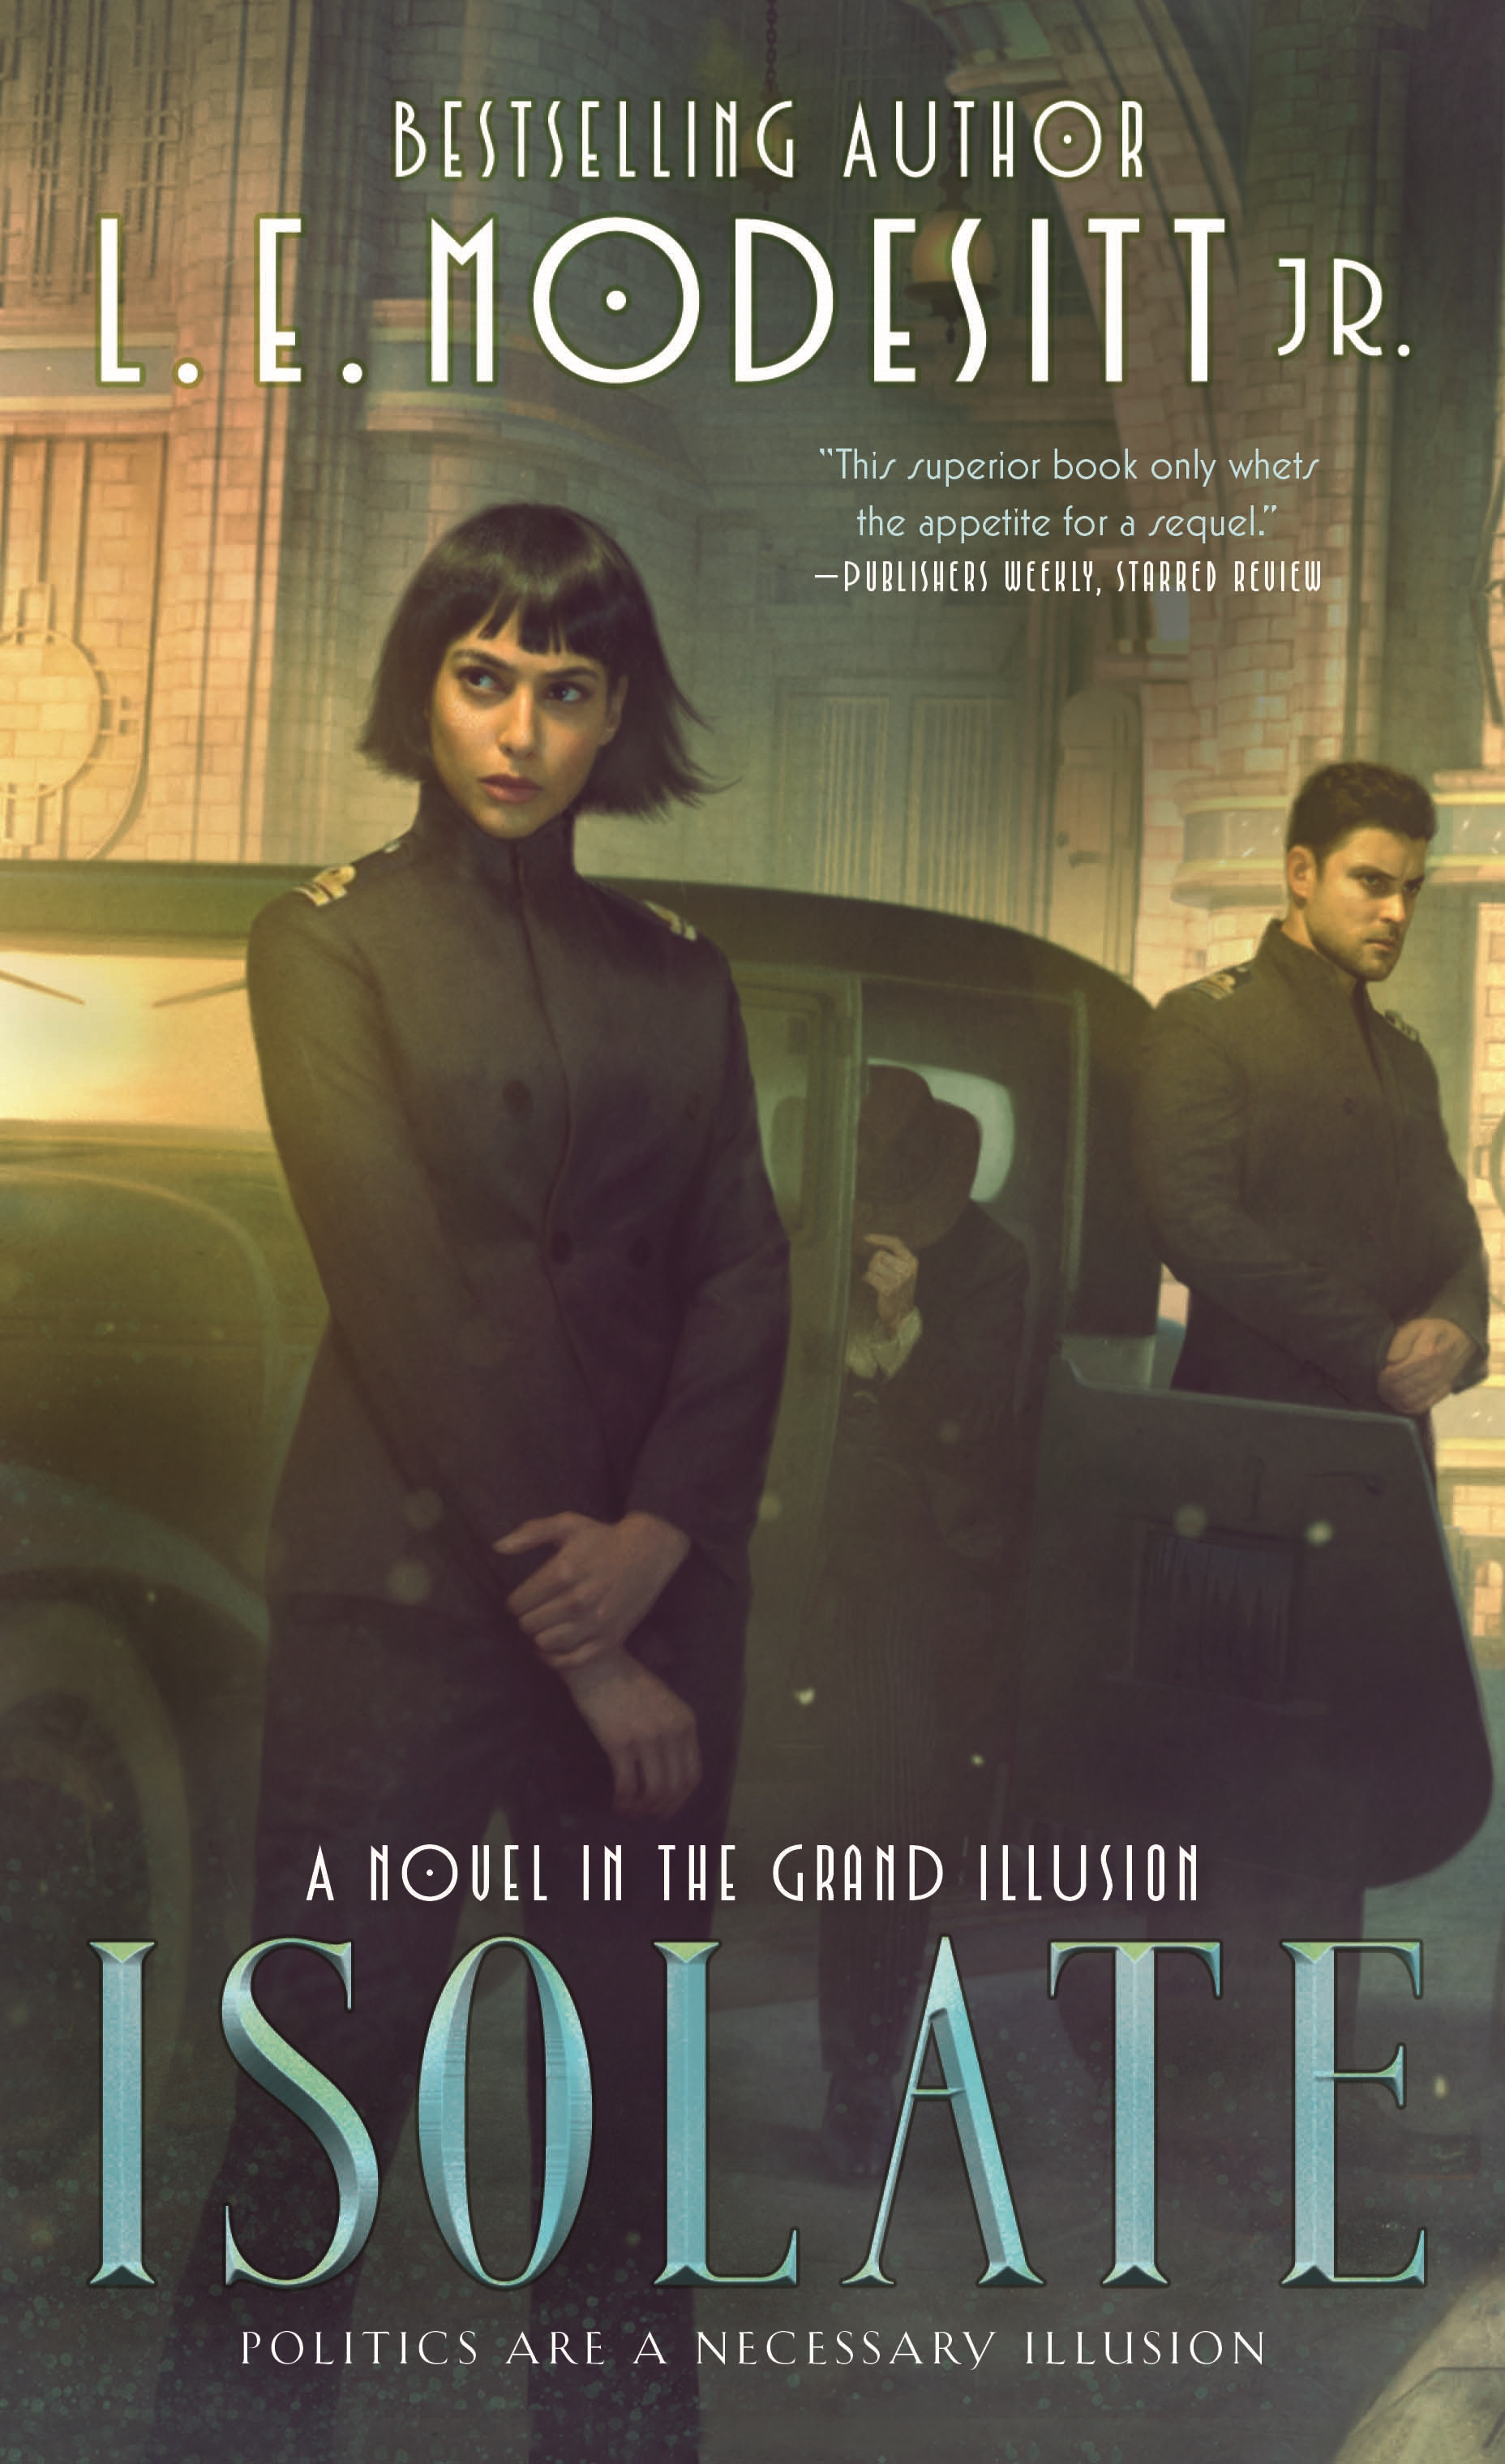 Isolate : A Novel in the Grand Illusion by L. E. Modesitt, Jr.